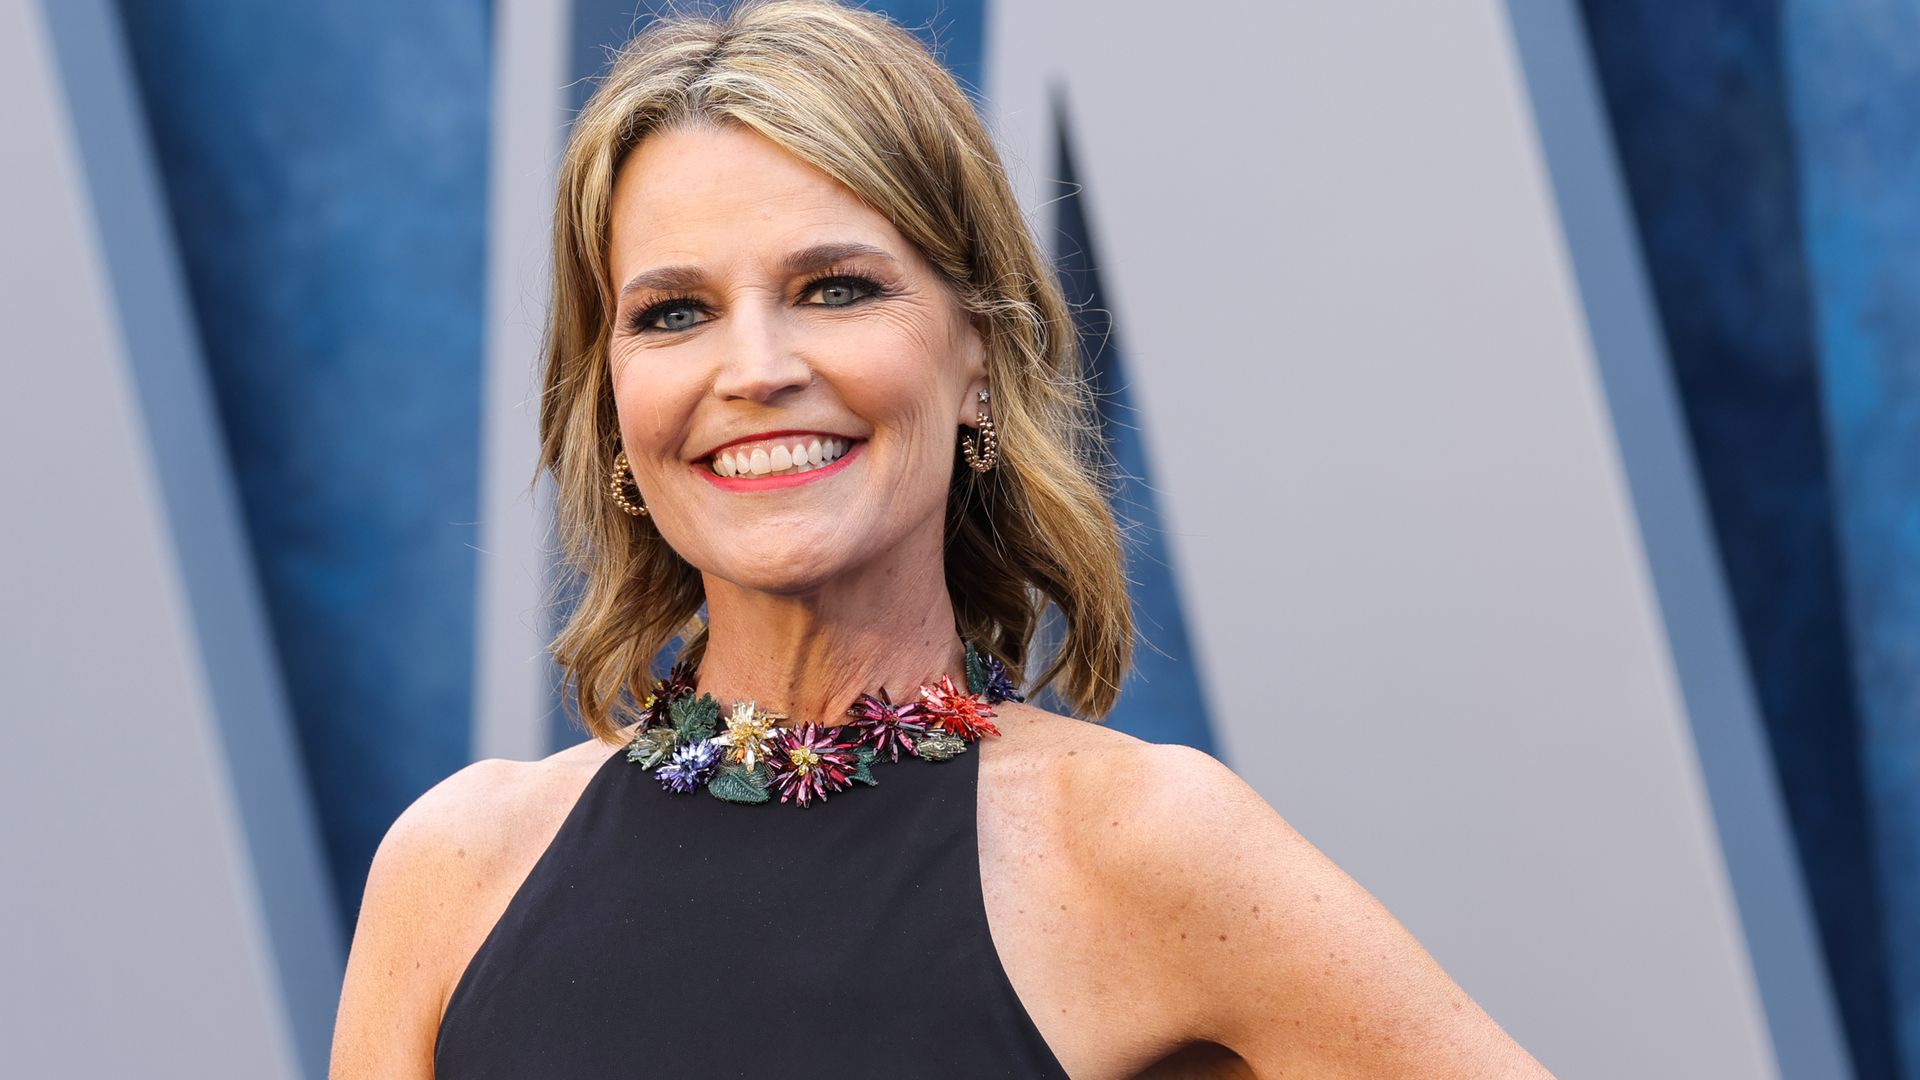 Savannah Guthrie's double dose of happiness during memorable day was just like a fairytale!